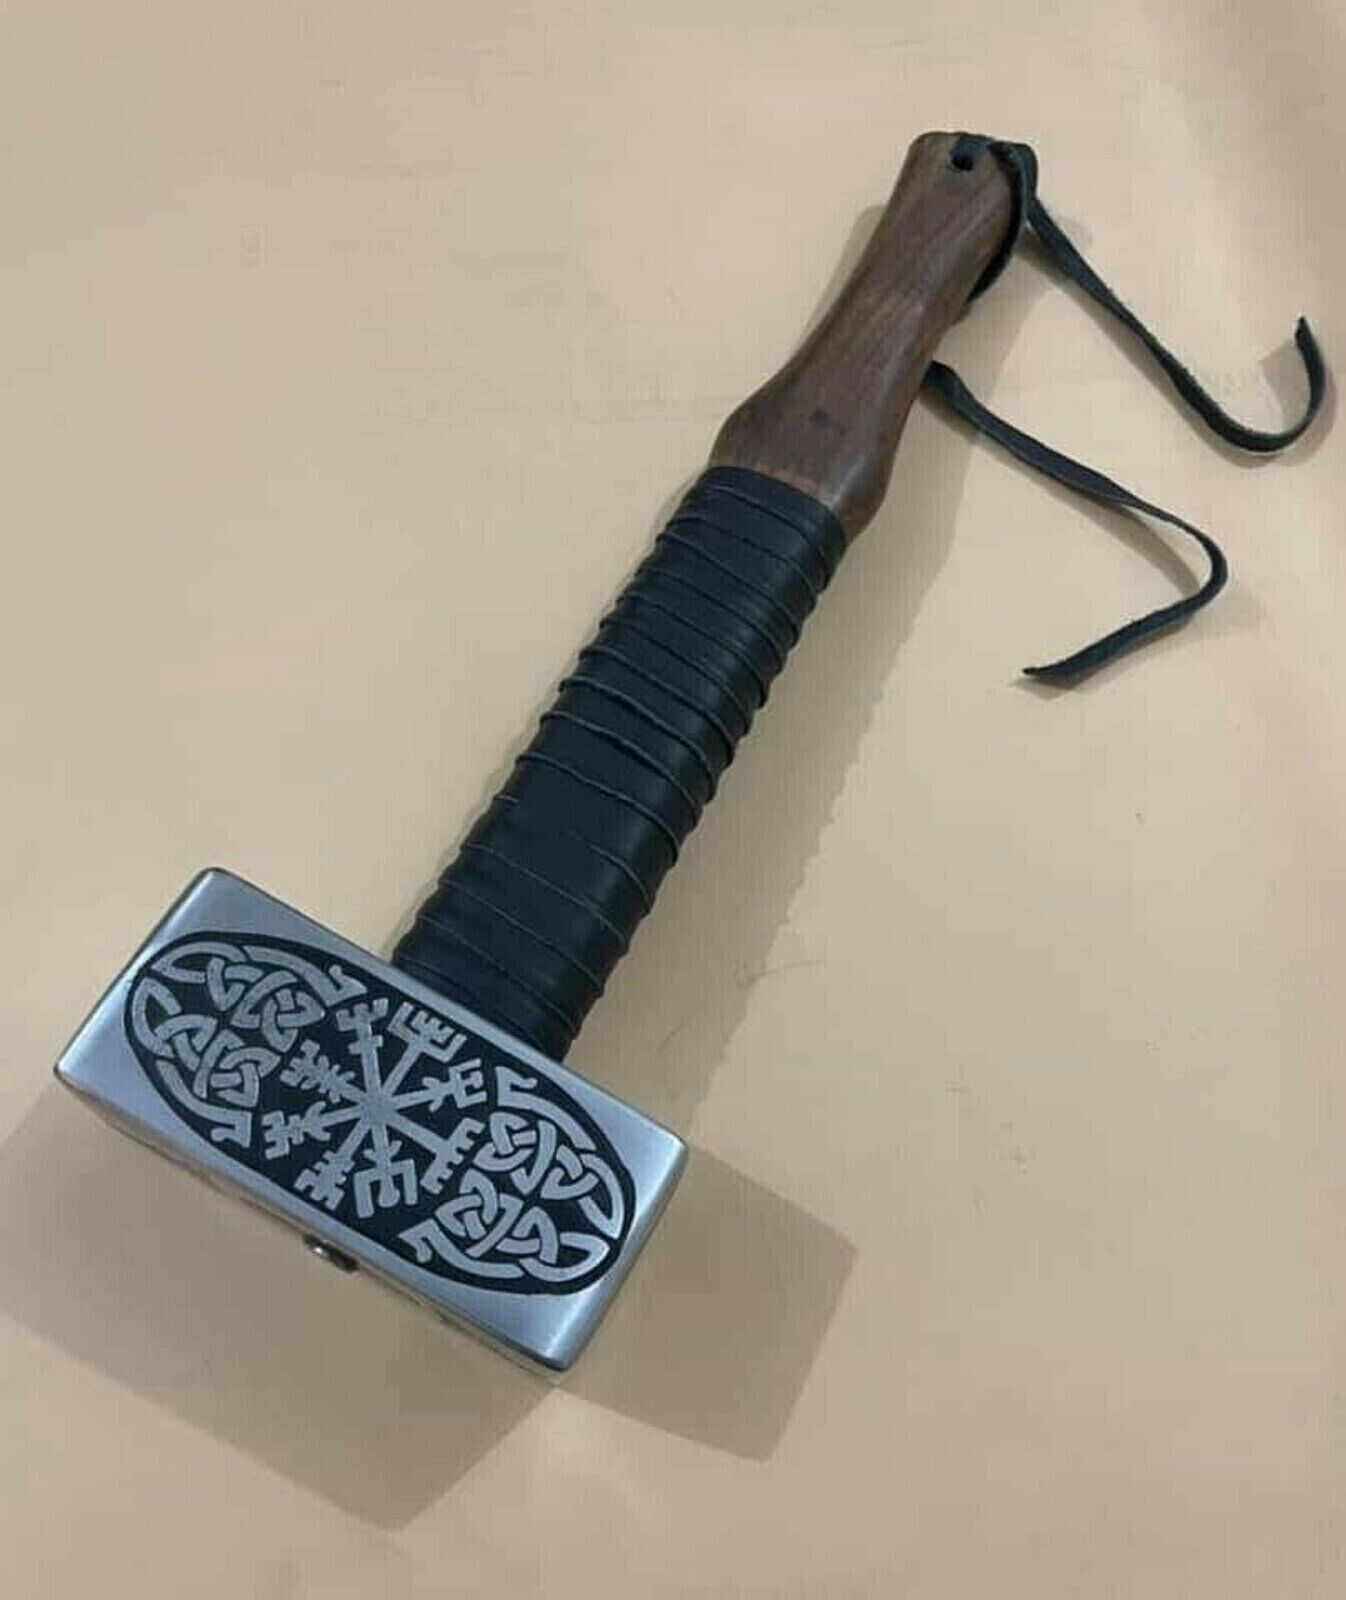 Viking Hammer , Mjolnir Hammer, Hand Forged Corban Steel Special for use